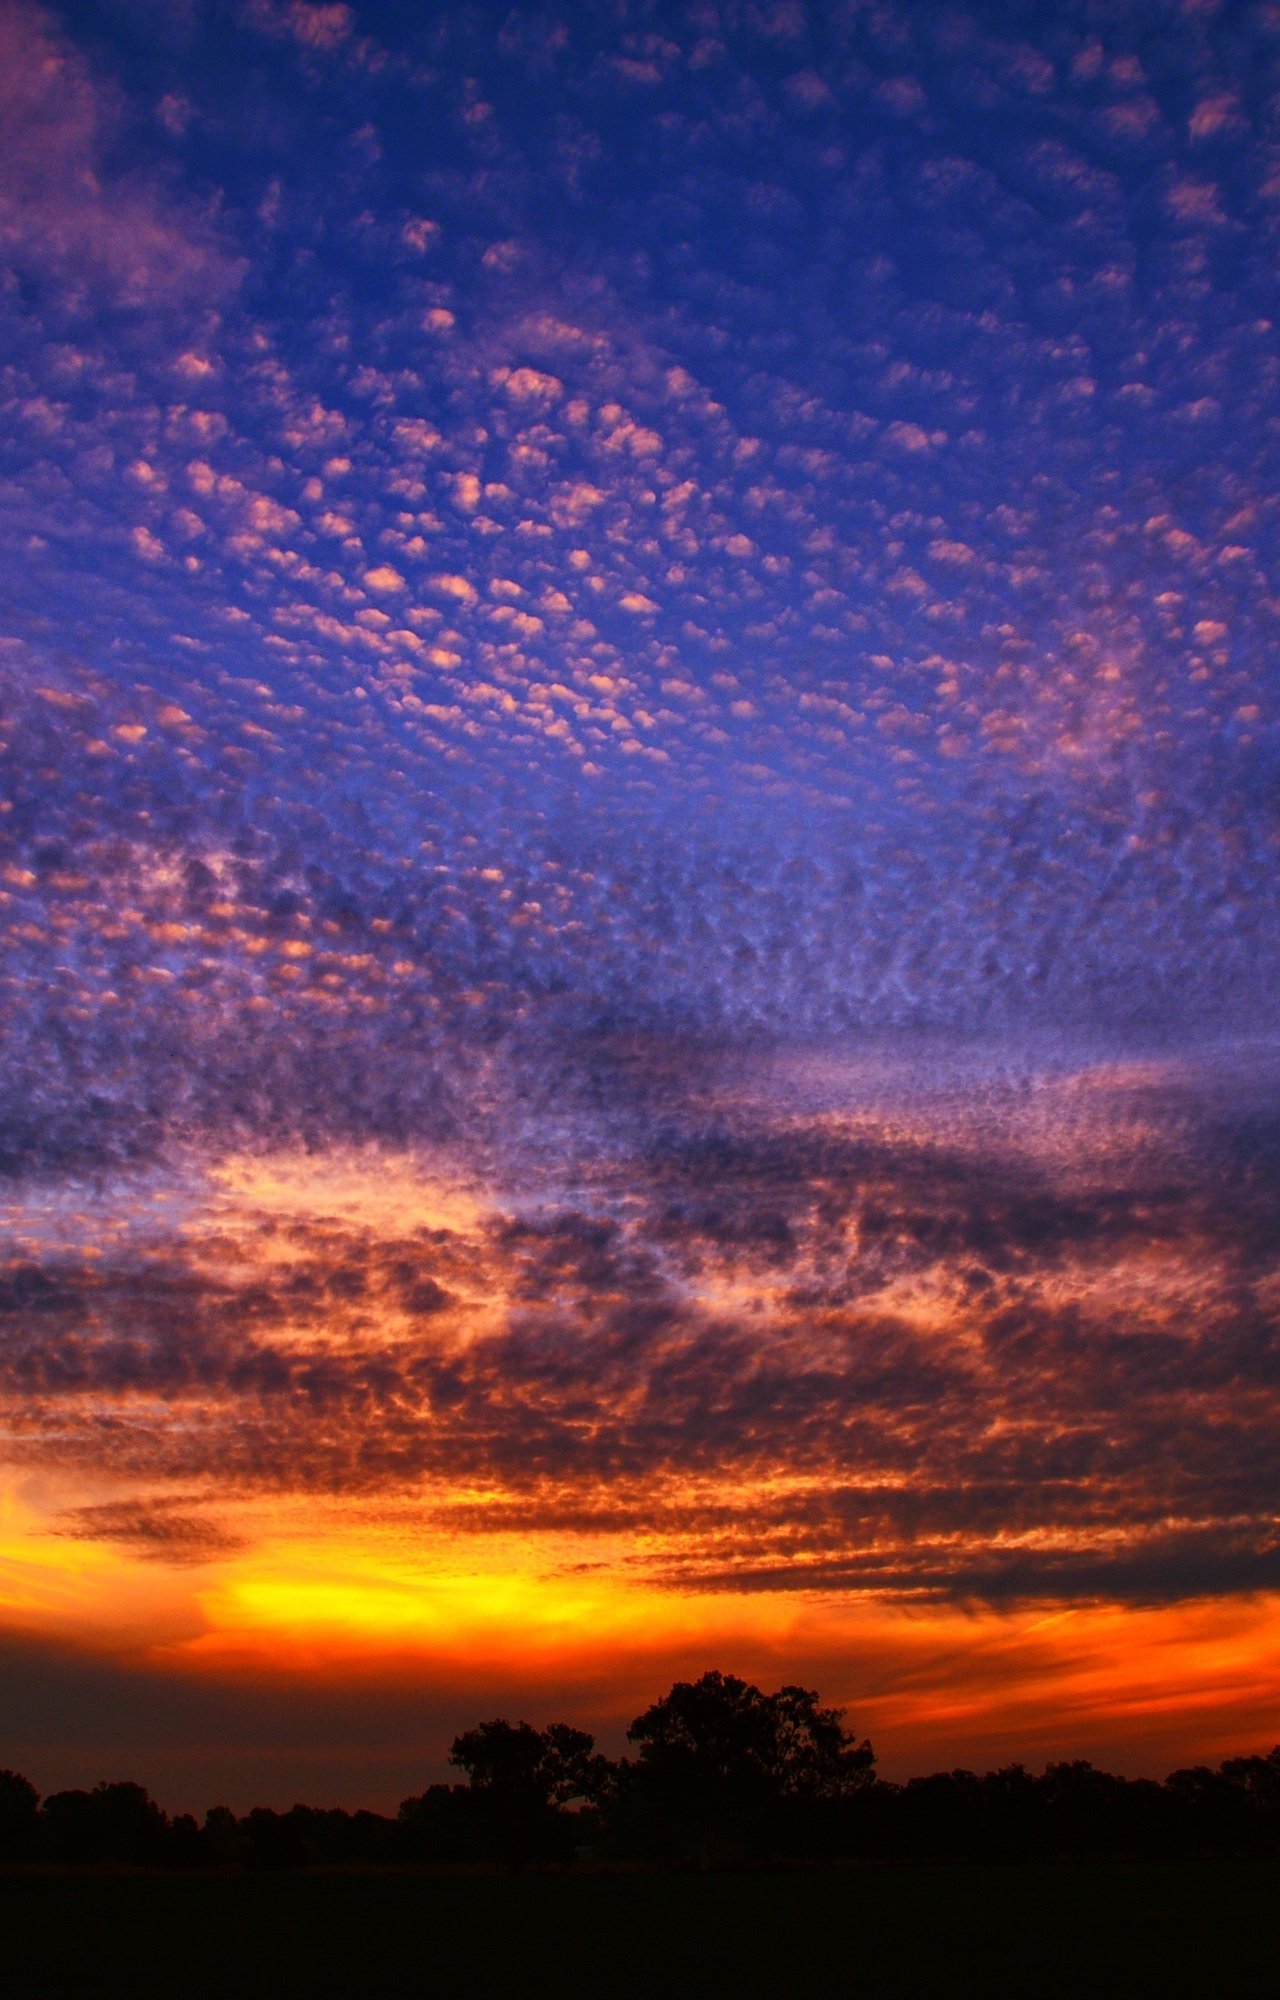 Download wallpaper 1280x2120 sunset, clouds, blue orange sky, iphone 6 plus, 1280x2120 HD background, 4923